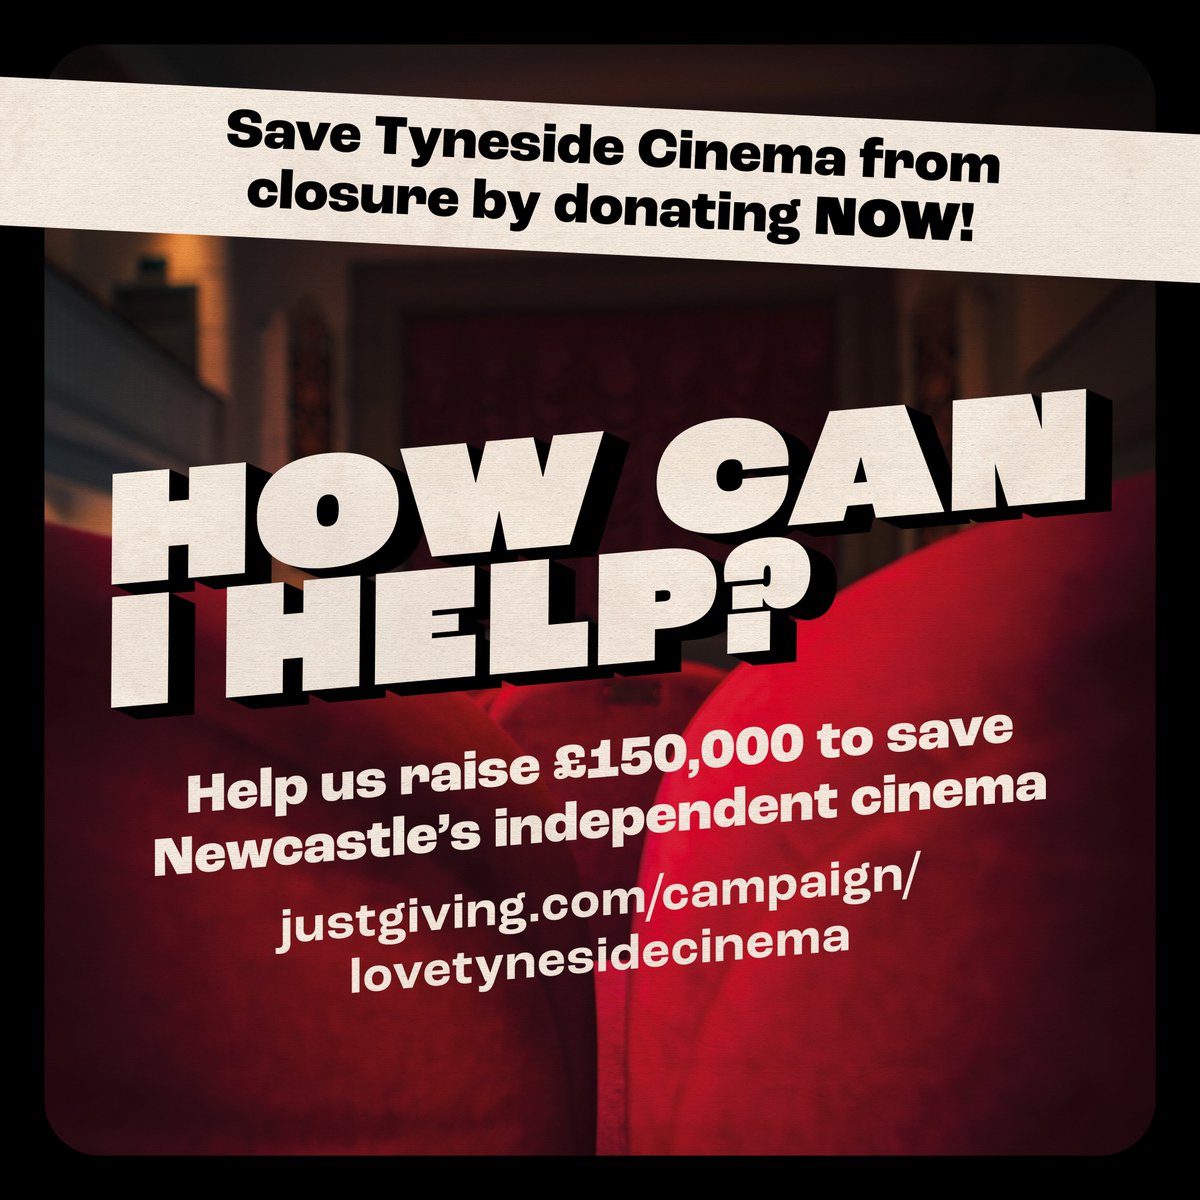 Our campaign has reached £50,000. We are so grateful to everyone supporting the cinema. However, our target of £150,000 is still a distance away and the threat of closure is still a possibility. Please donate so we can continue to bring transformative cinematic experiences.